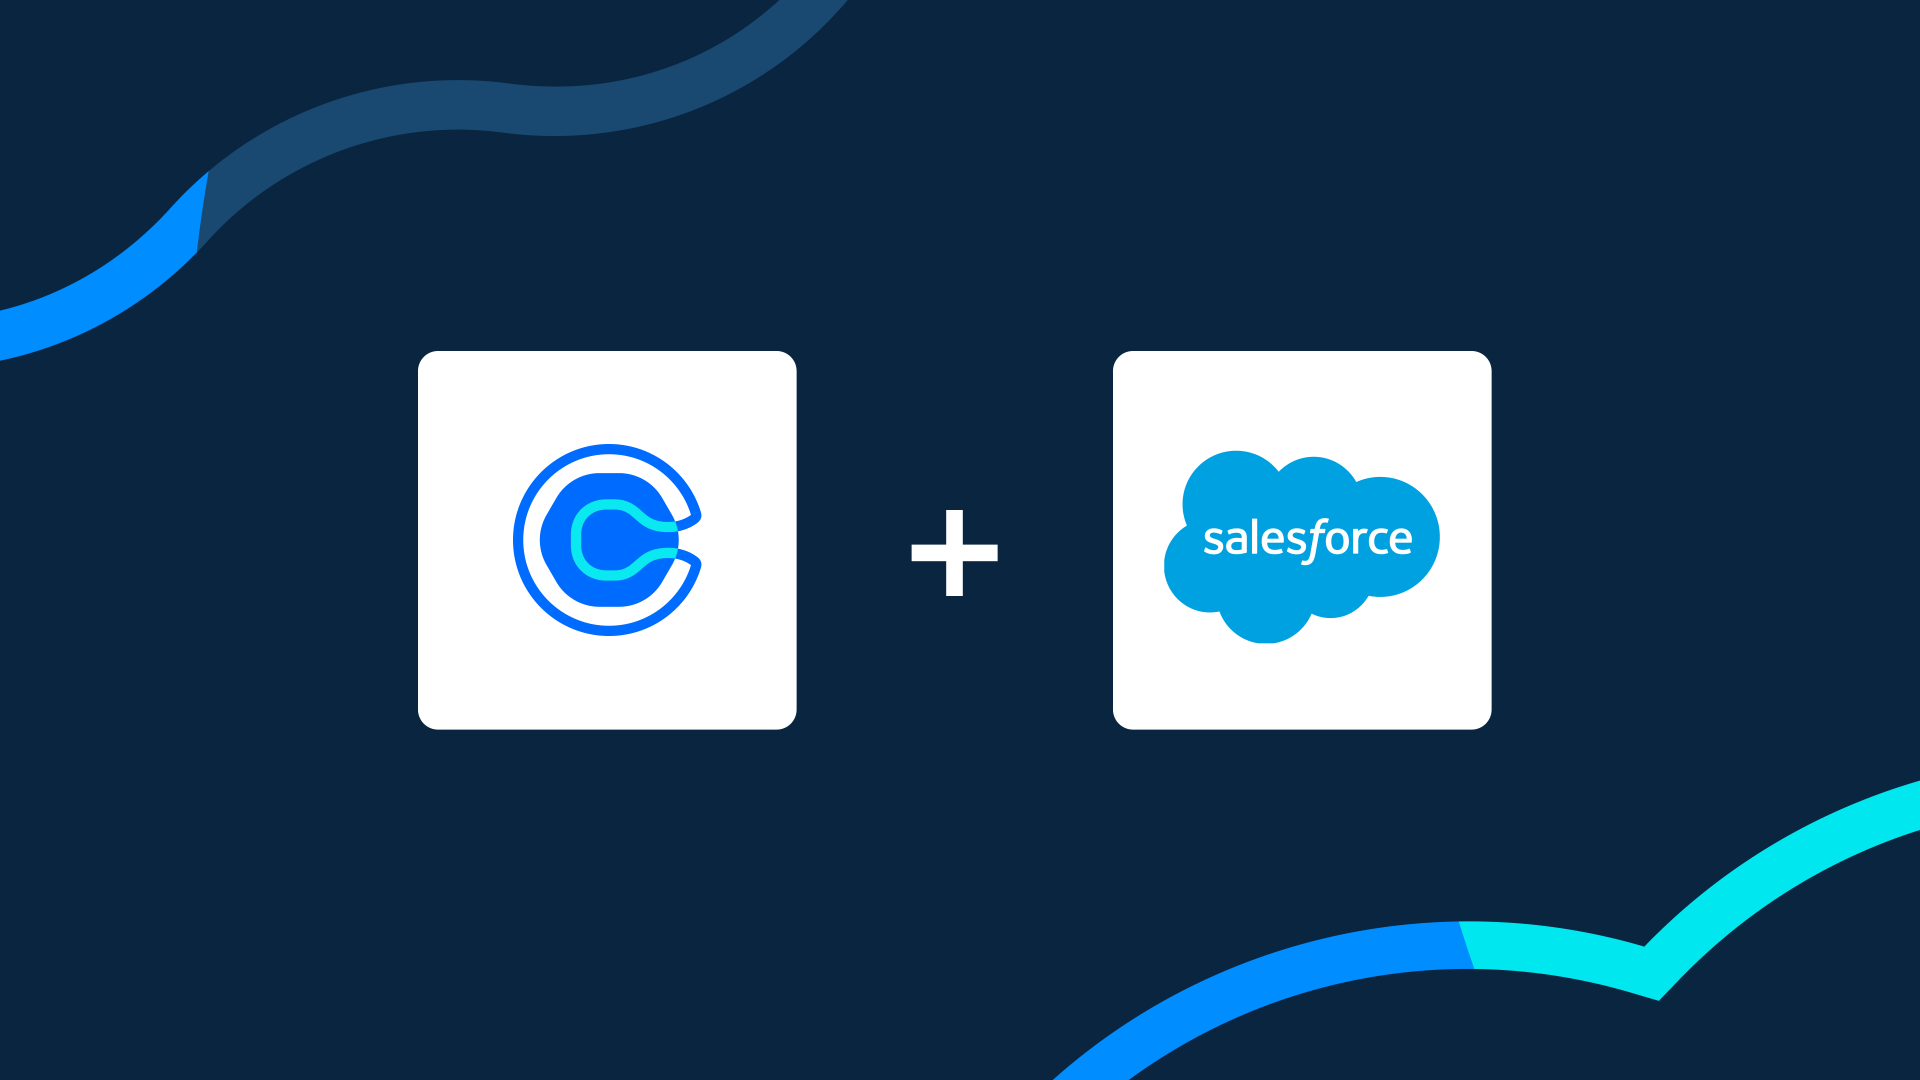 How to connect Calendly and Salesforce Calendly